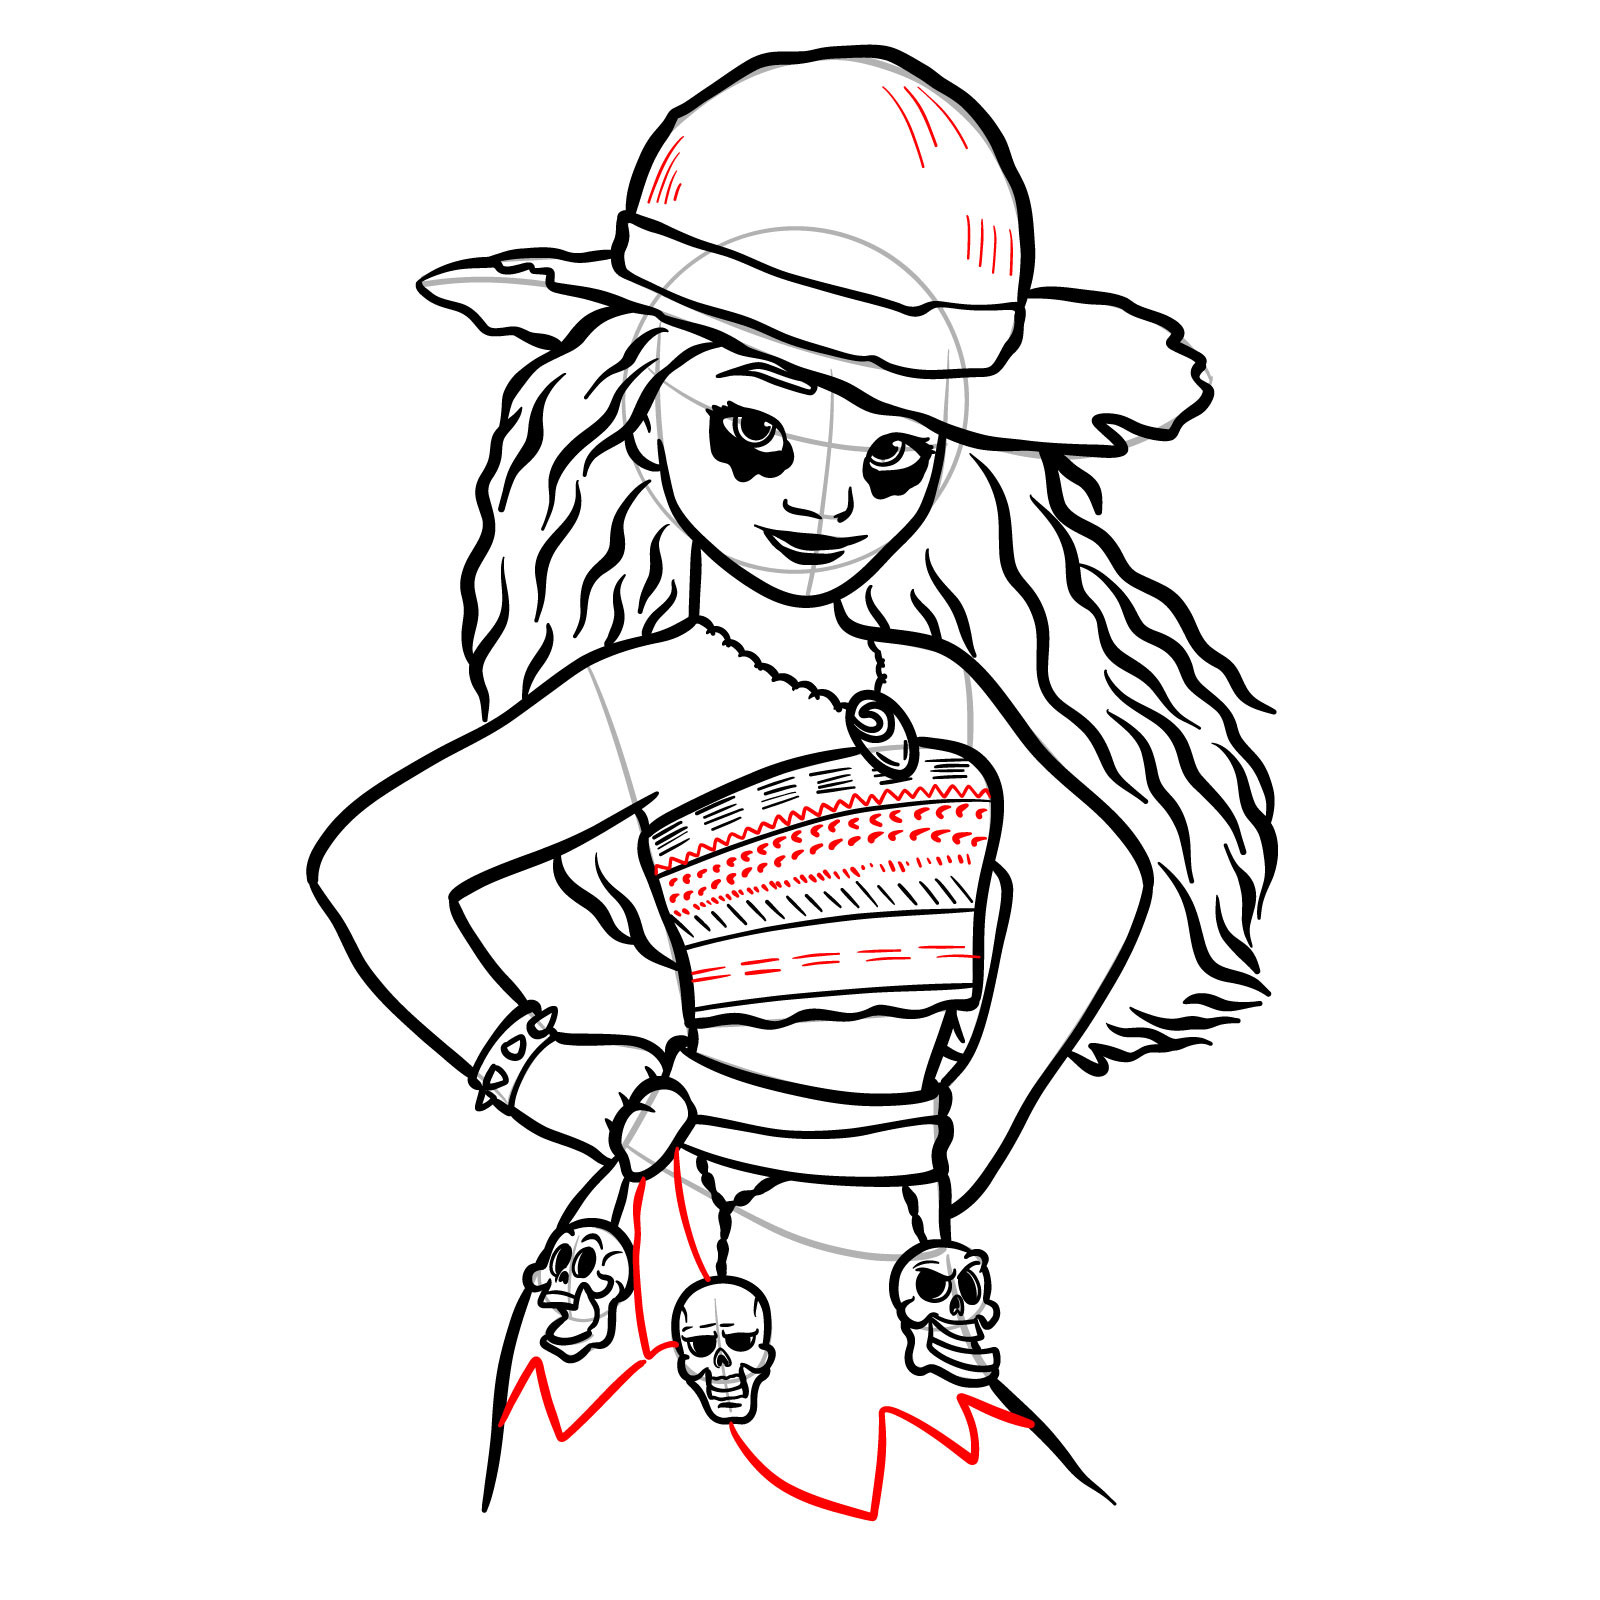 How to Draw Halloween Moana as a Staw Hat Pirate - step 38